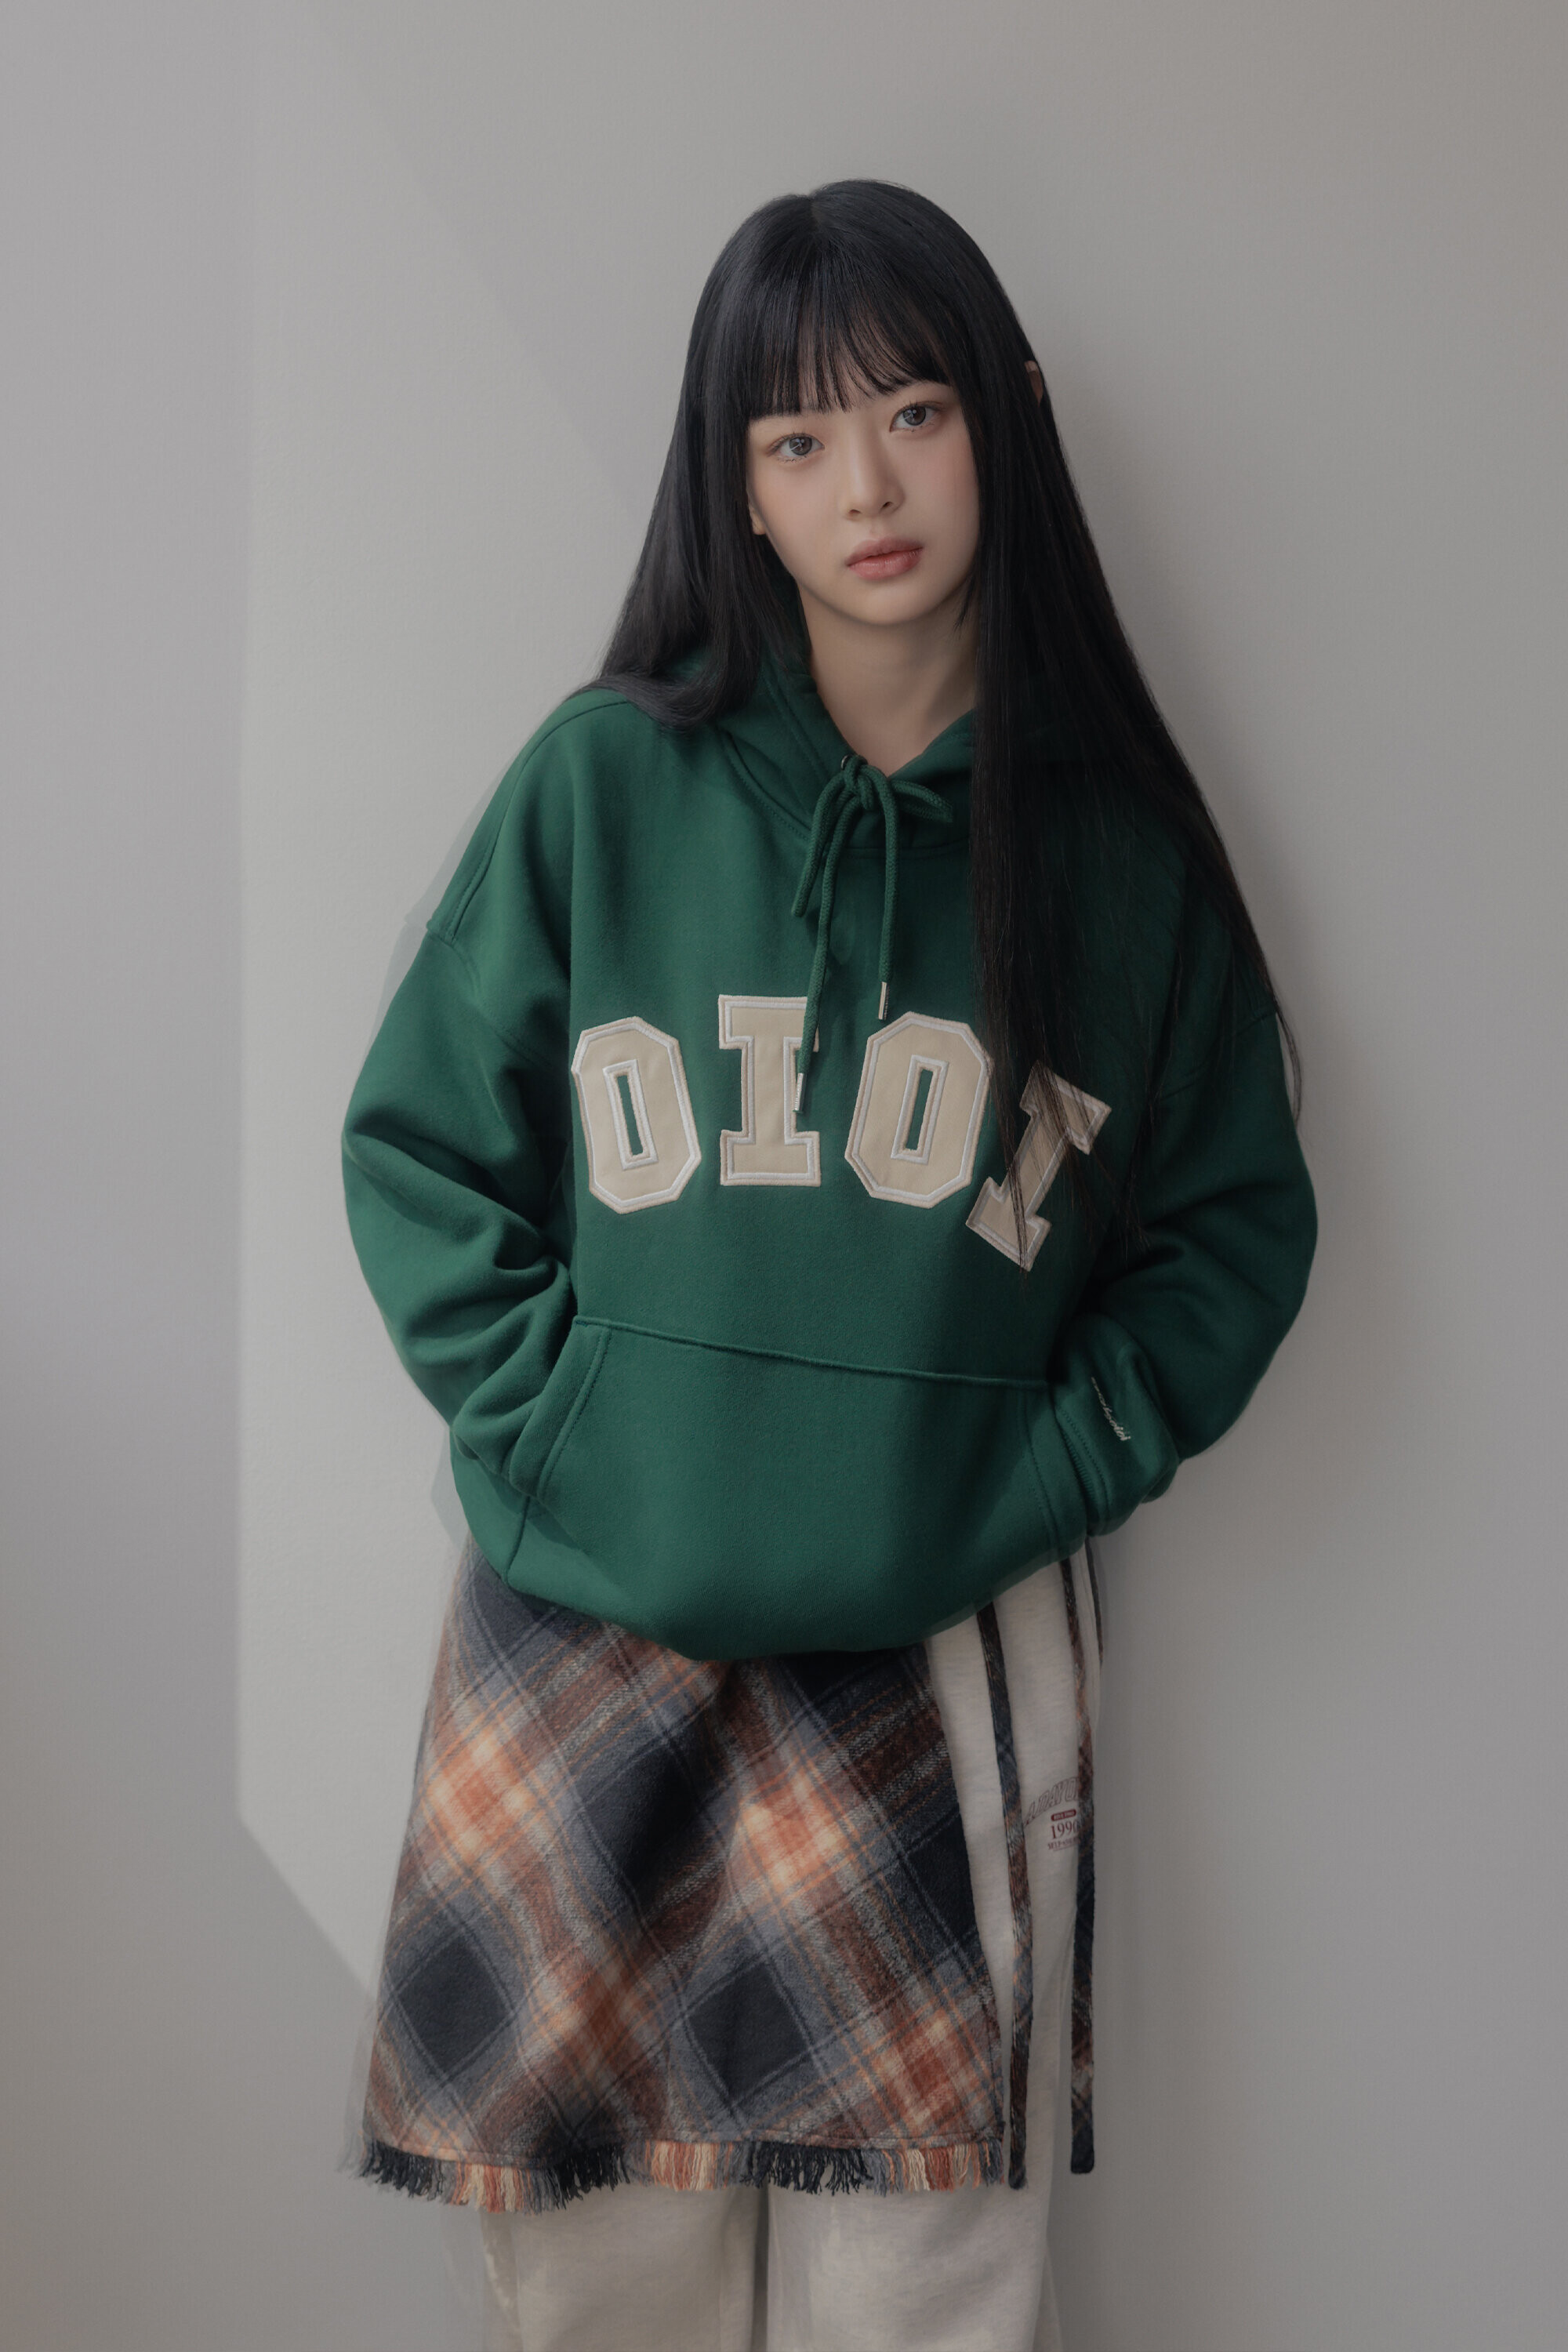 NewJeans for OiOi 2022 FW Collection | kpopping